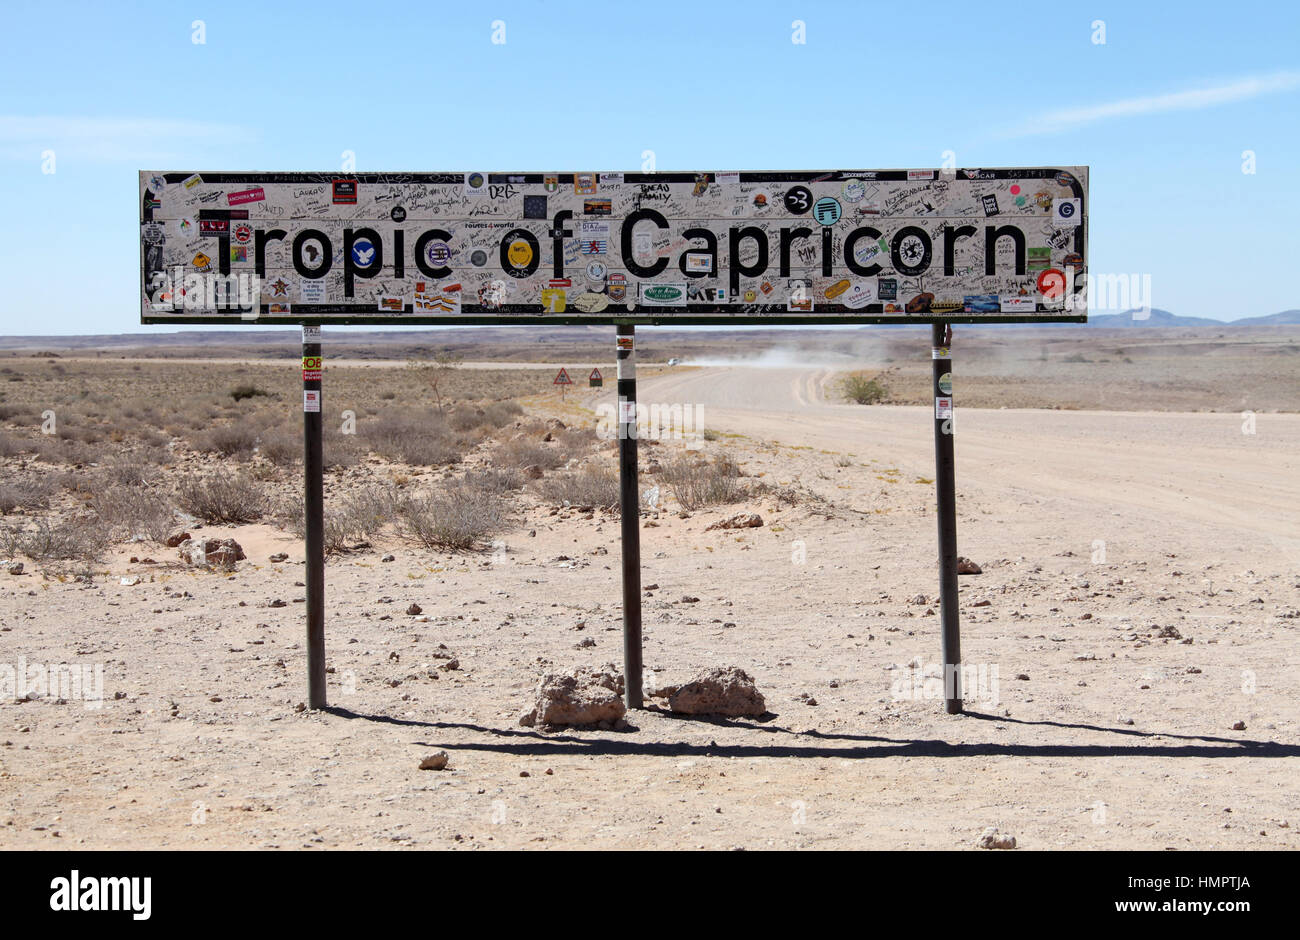 Tropic of Capricorn sign on a gravel road in Namibia Stock Photo